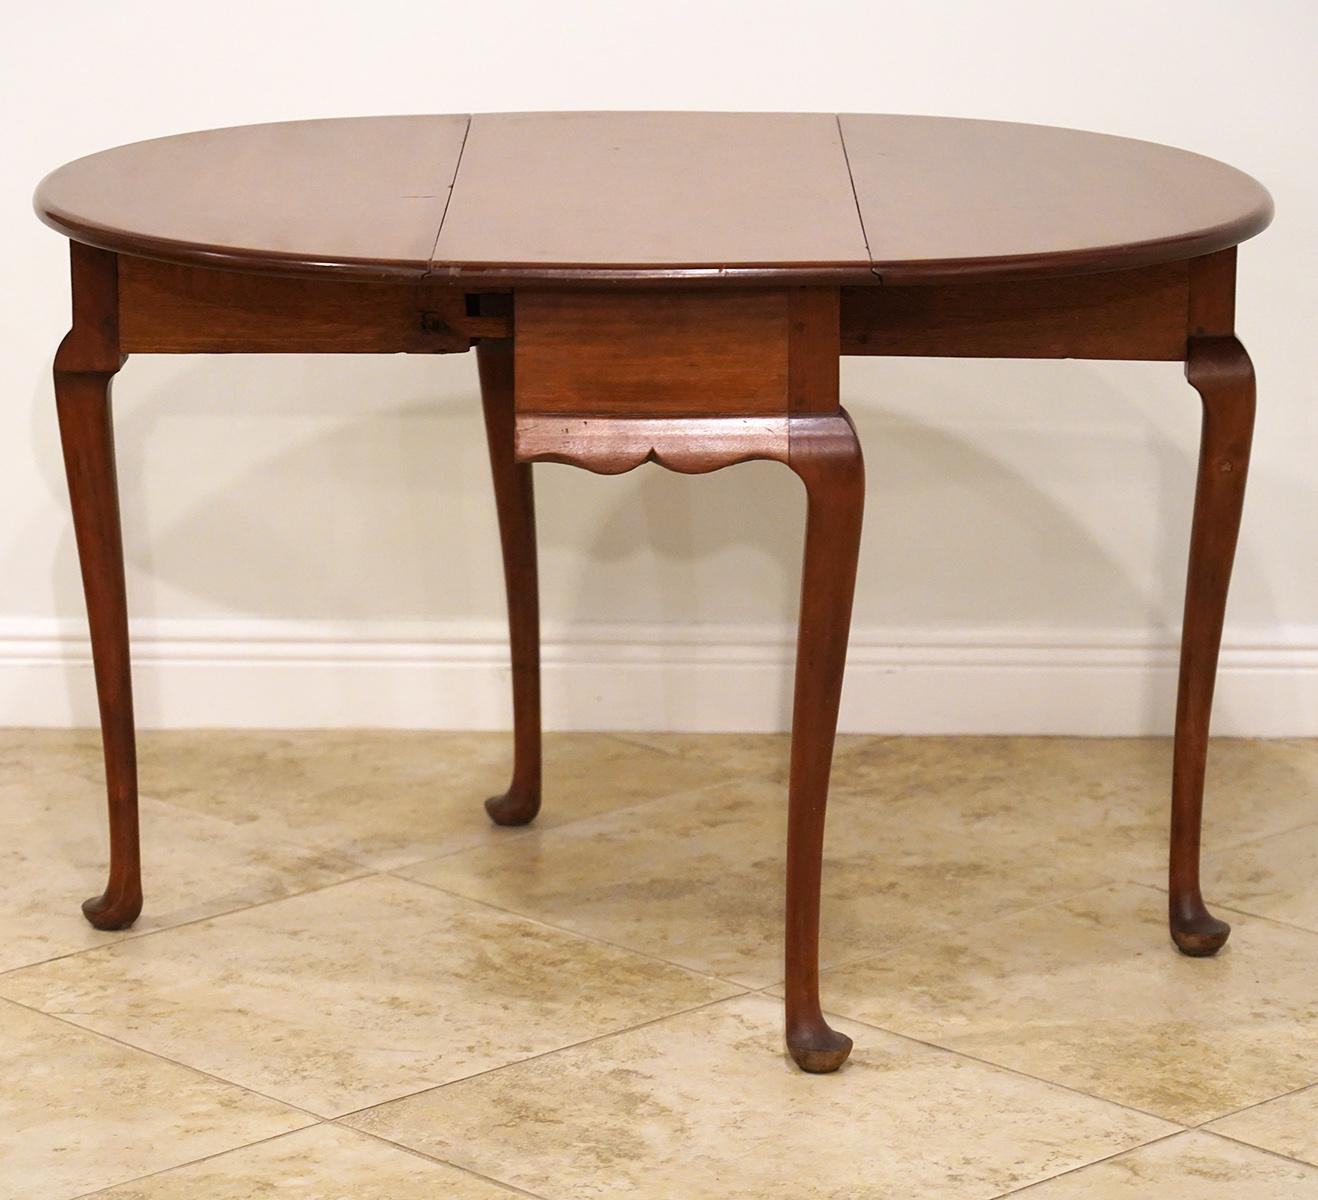 18th Century American New England Queen Anne Style Cherry Drop Leaf Table, circa 1780